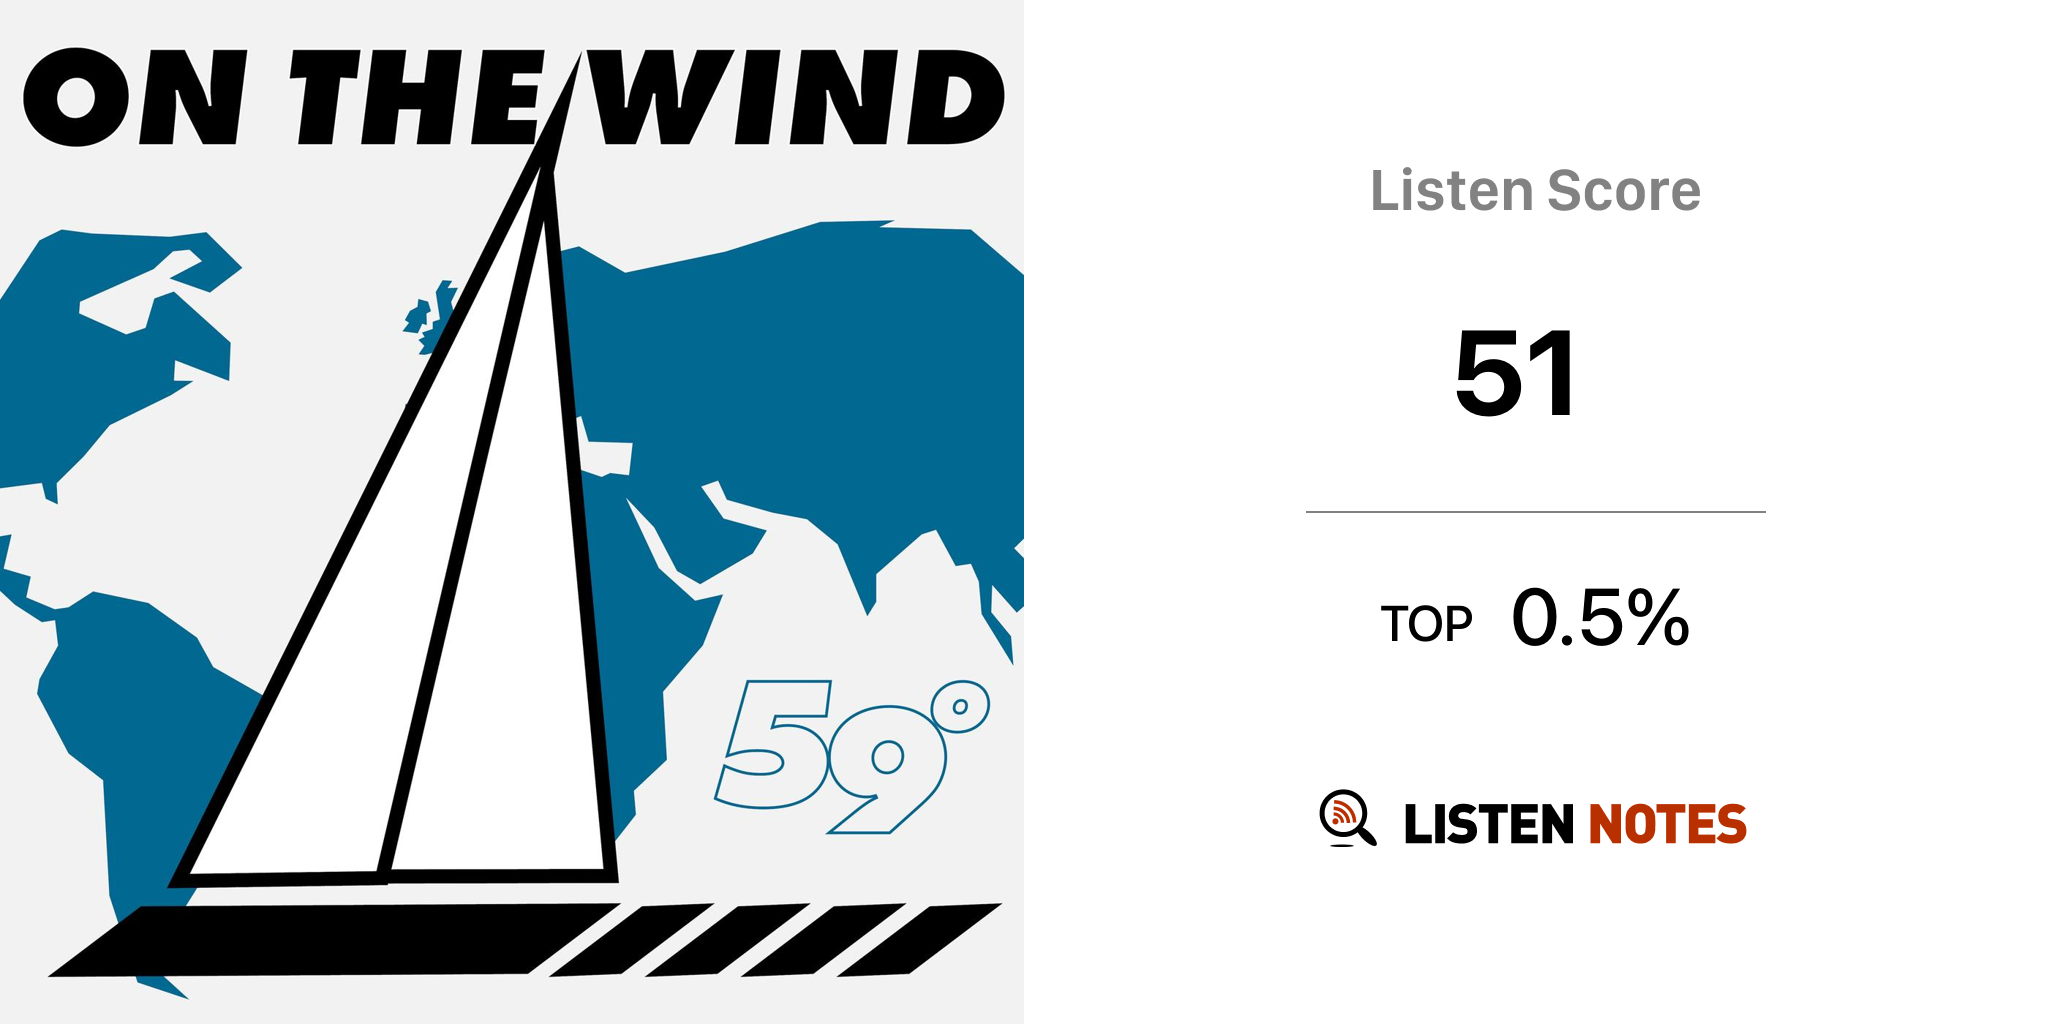 59 NORTH OFFSHORE SAILING // On the Wind Sailing Podcast